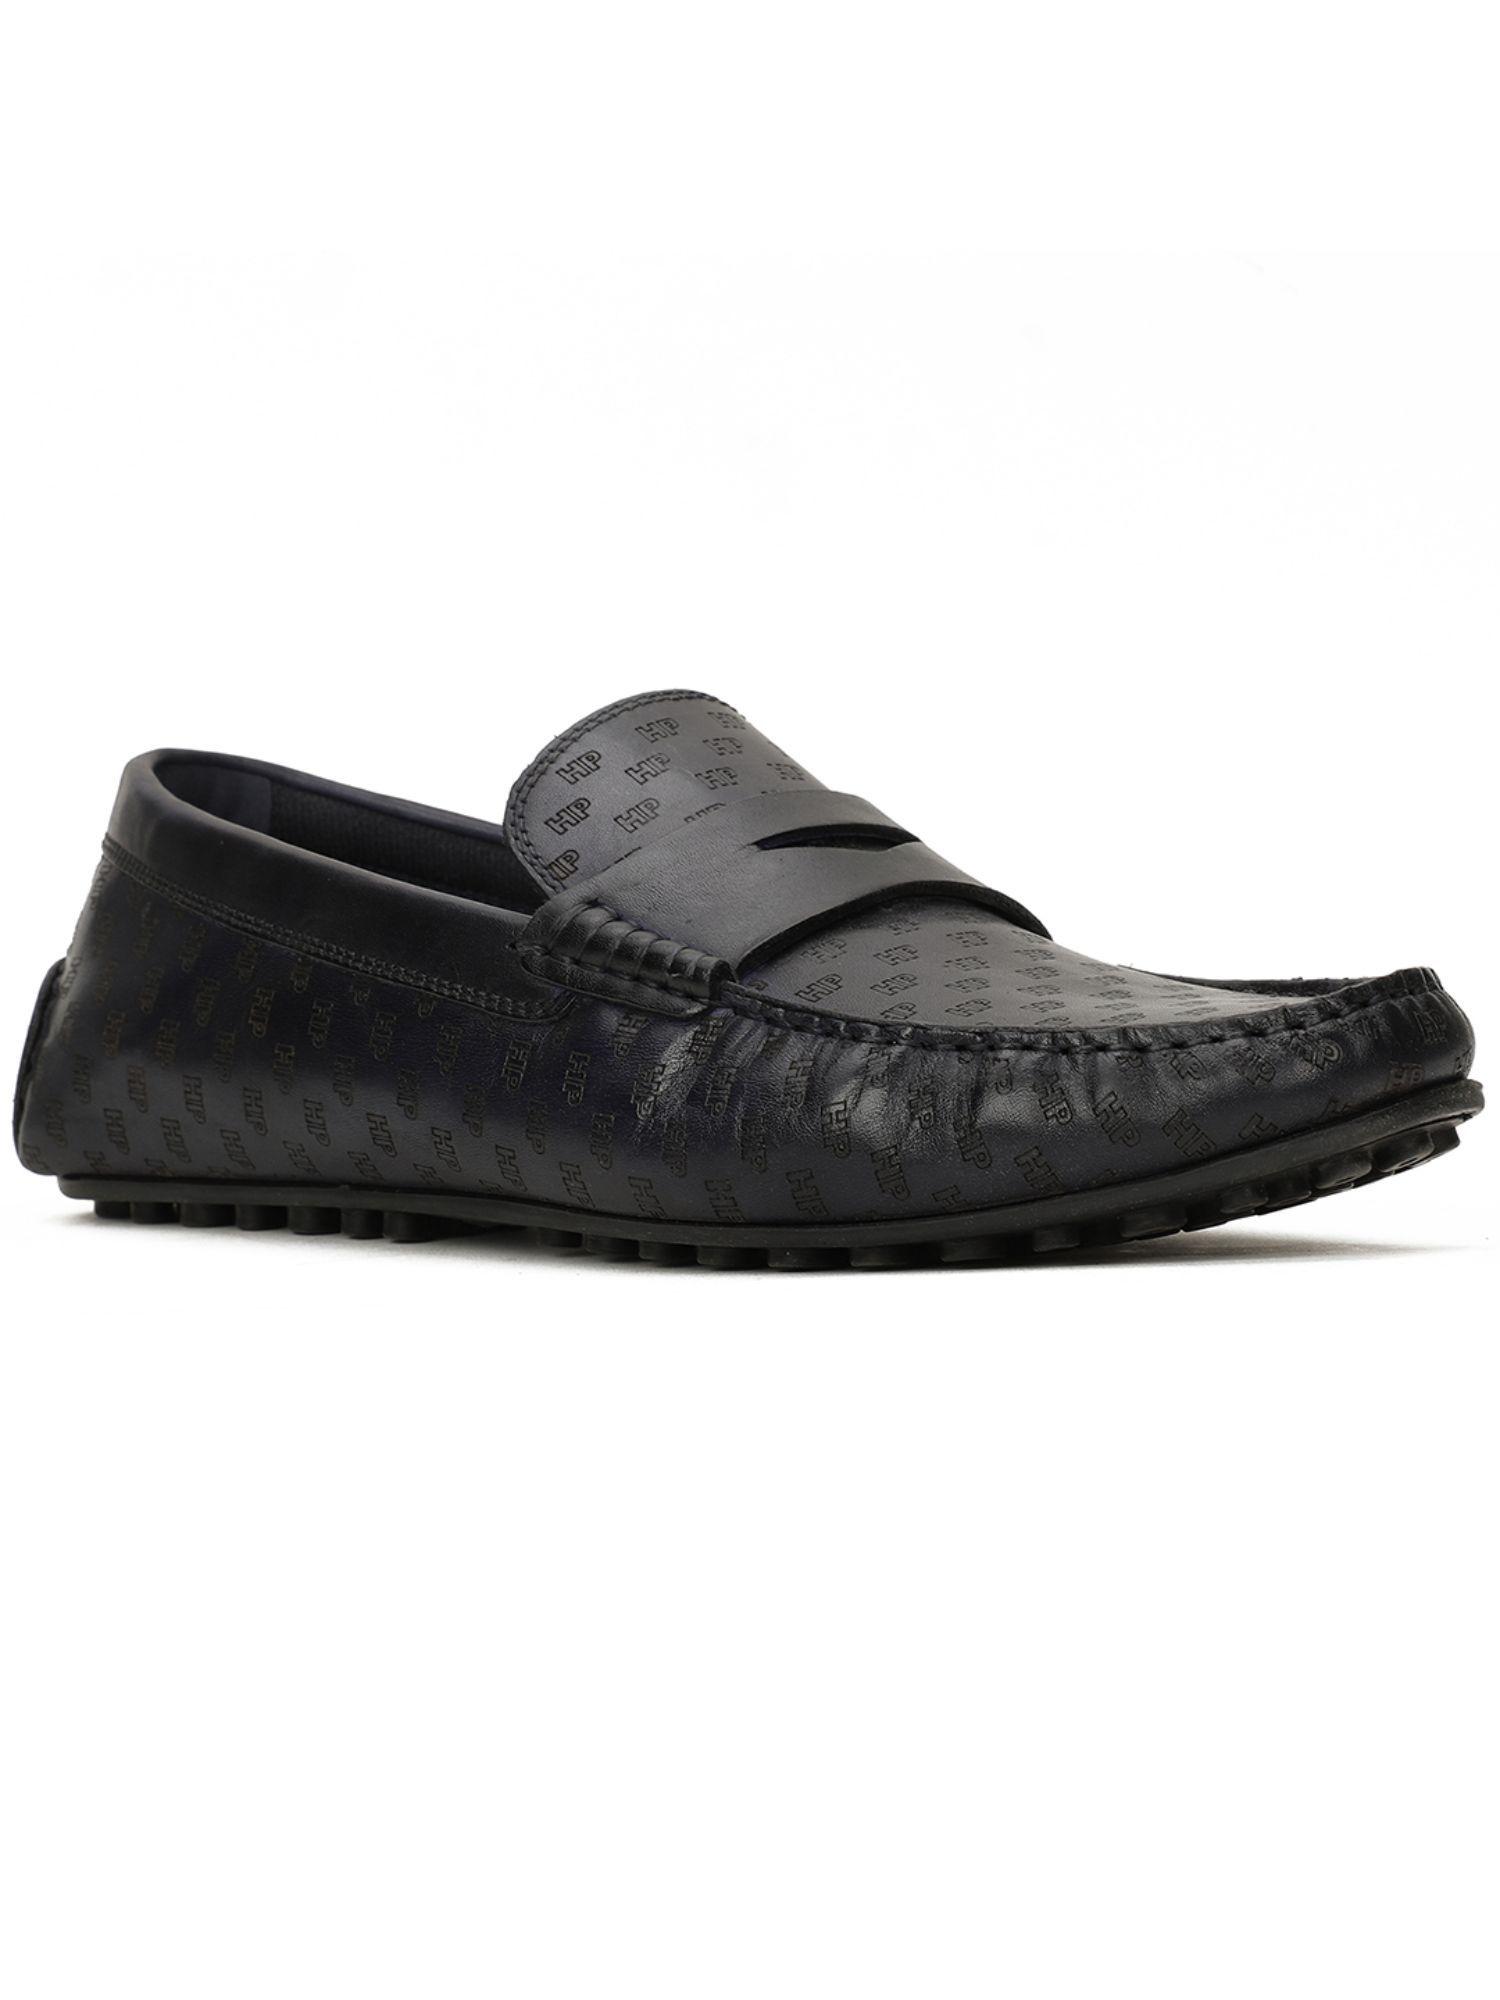 mens black slip on casual loafers